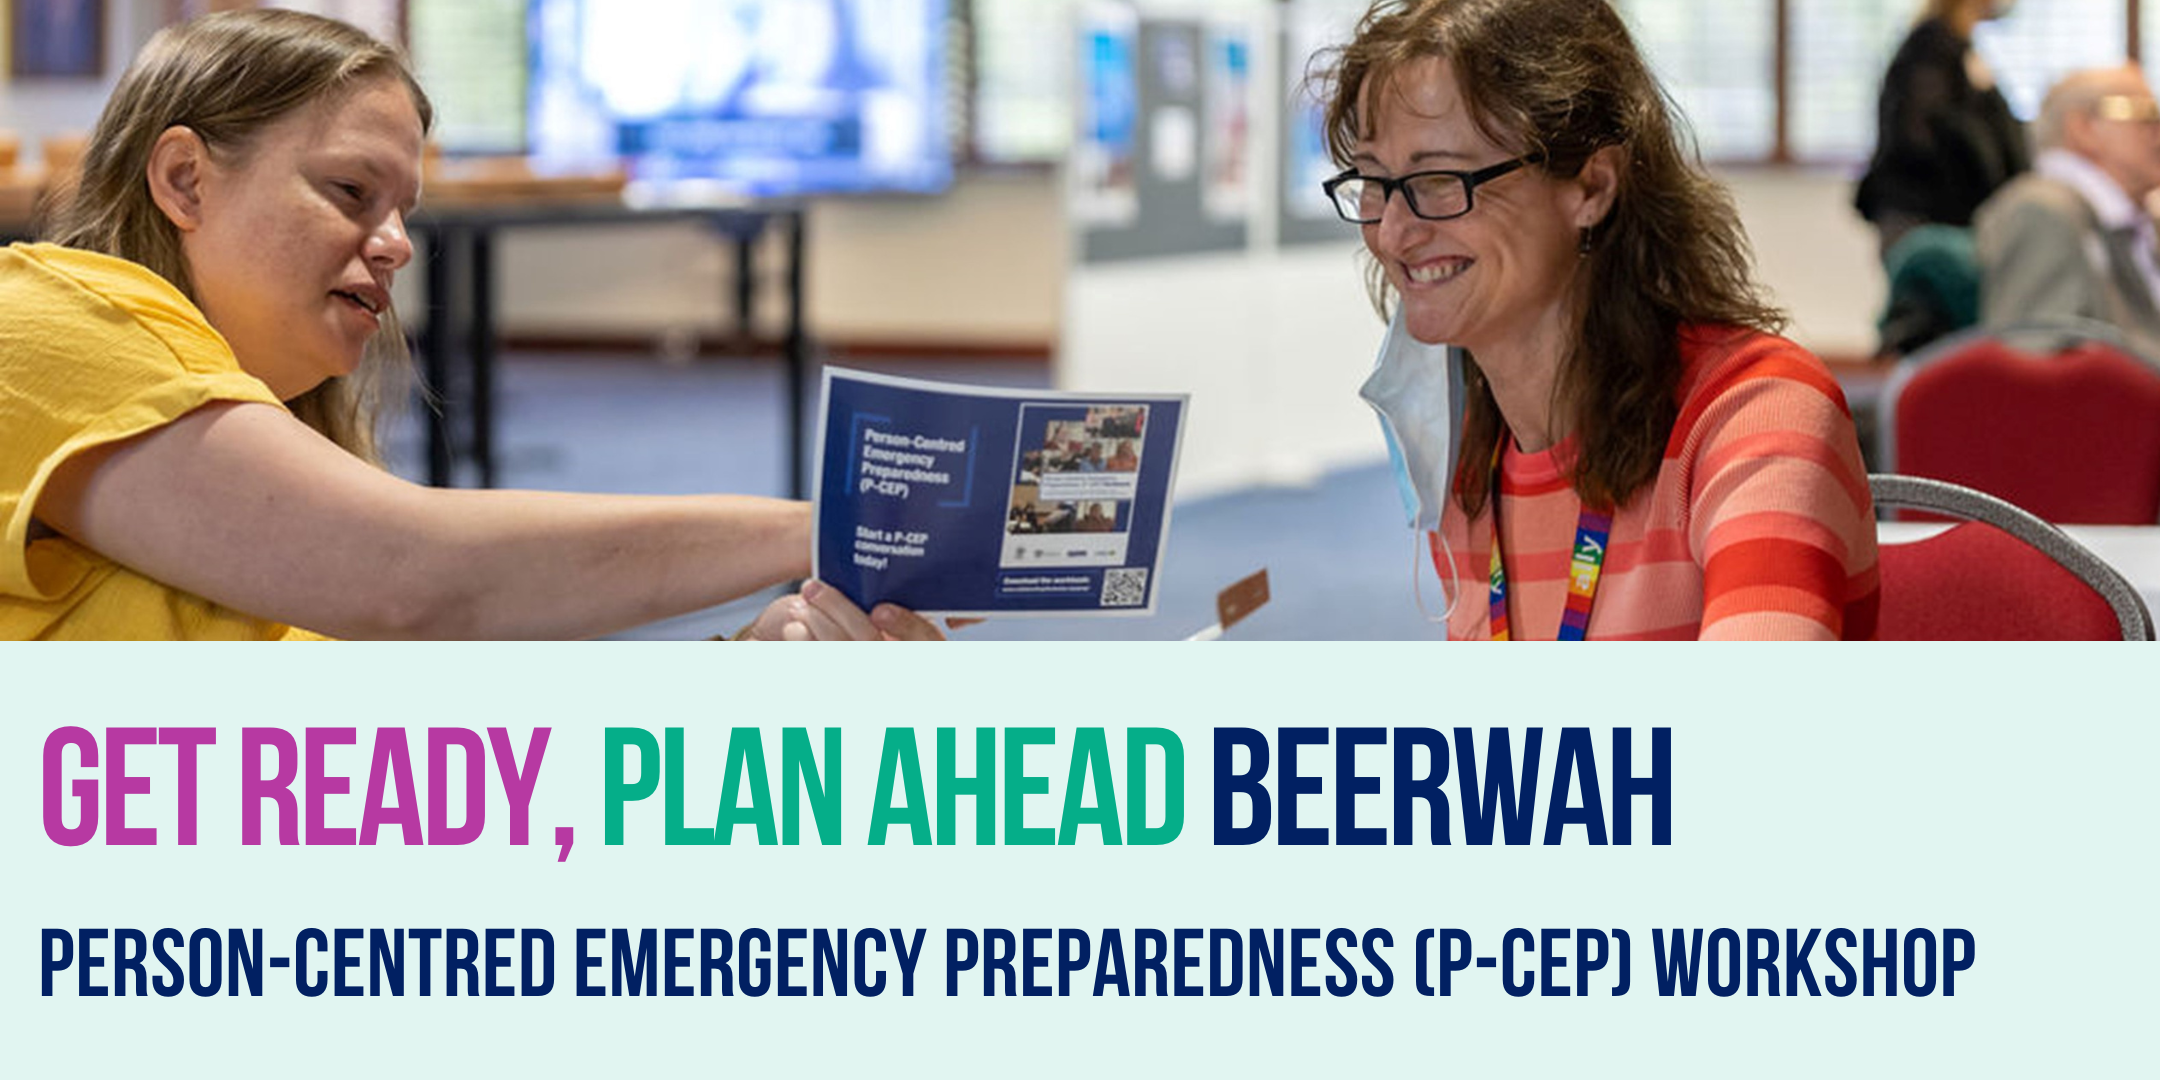 The image depicts two women engaging in conversation about the P-CEP workshop. The text overlay reads "Get Ready, Plan Ahead Beerwah. Person-Centred Emergency Preparedness (P-CEP) Workshop".